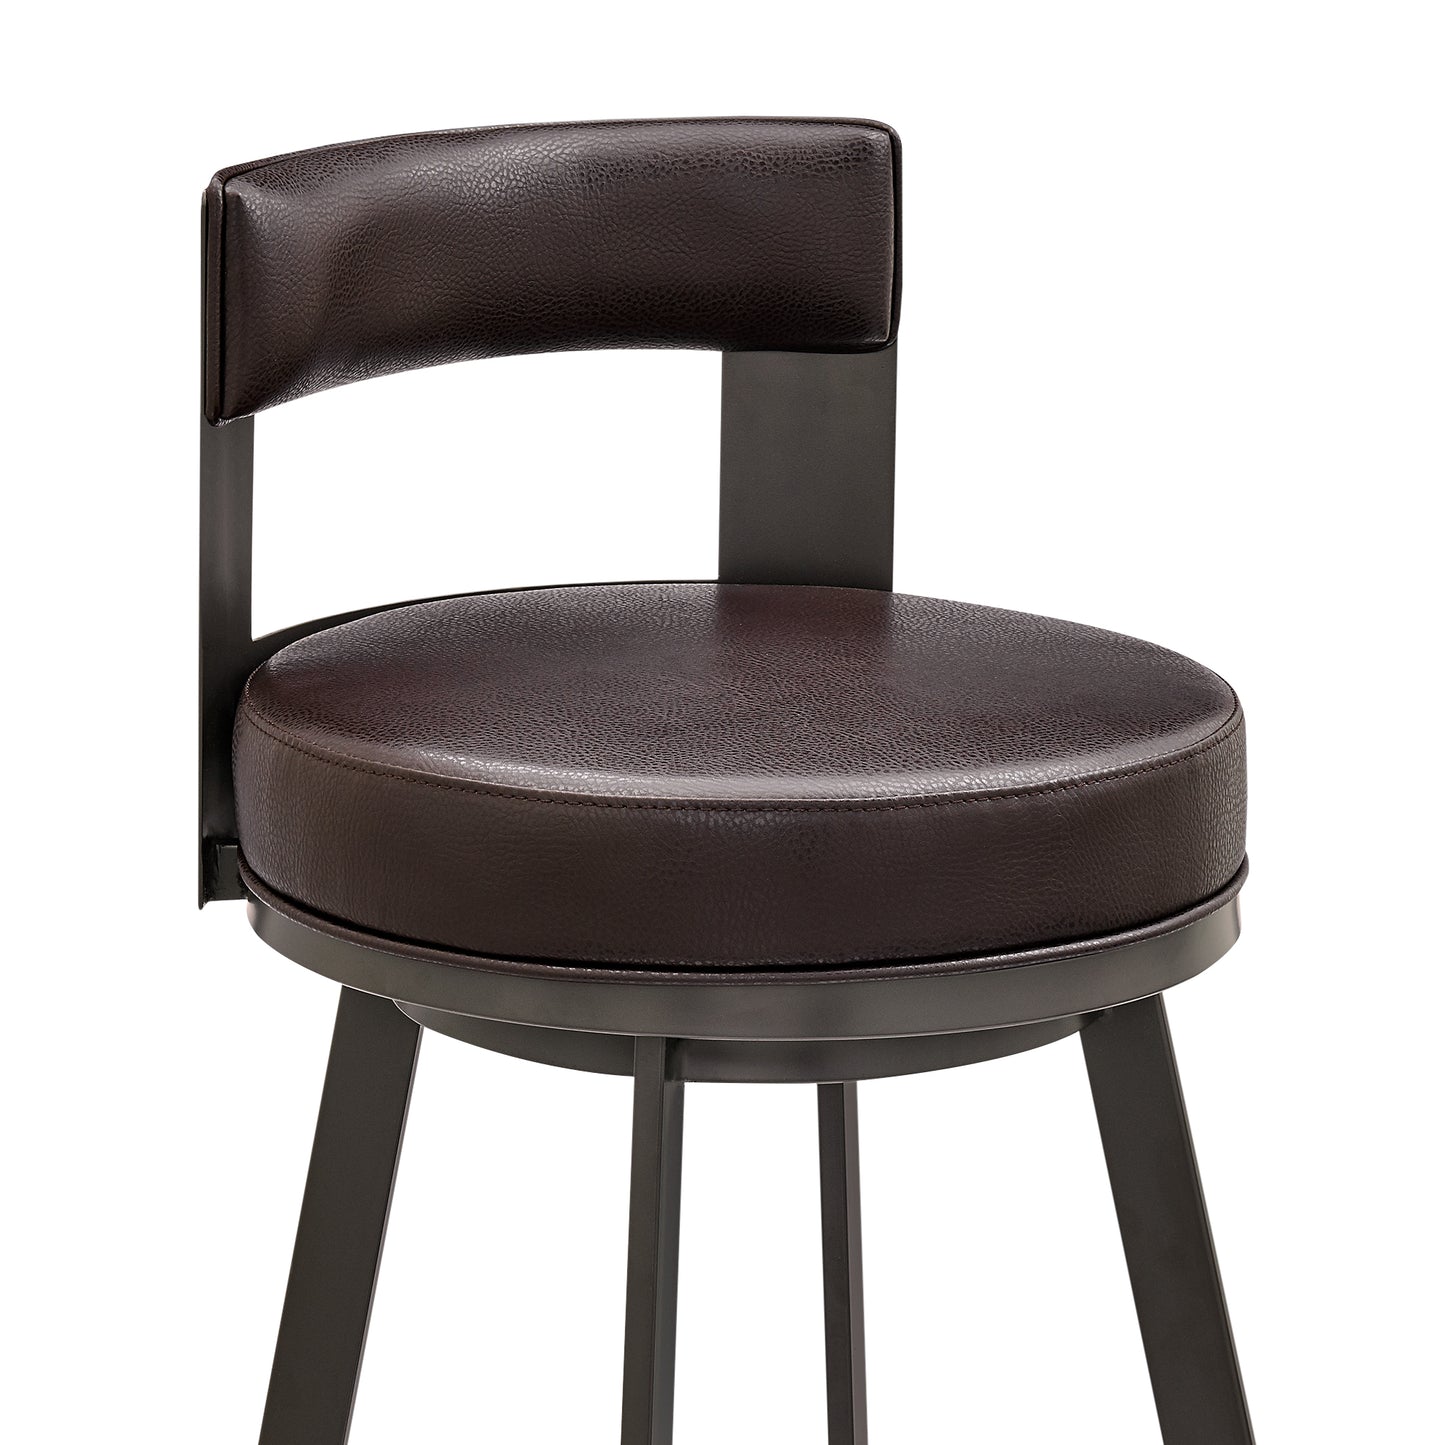 Flynn 30" Swivel Bar Stool in Brown Metal with Brown Faux Leather